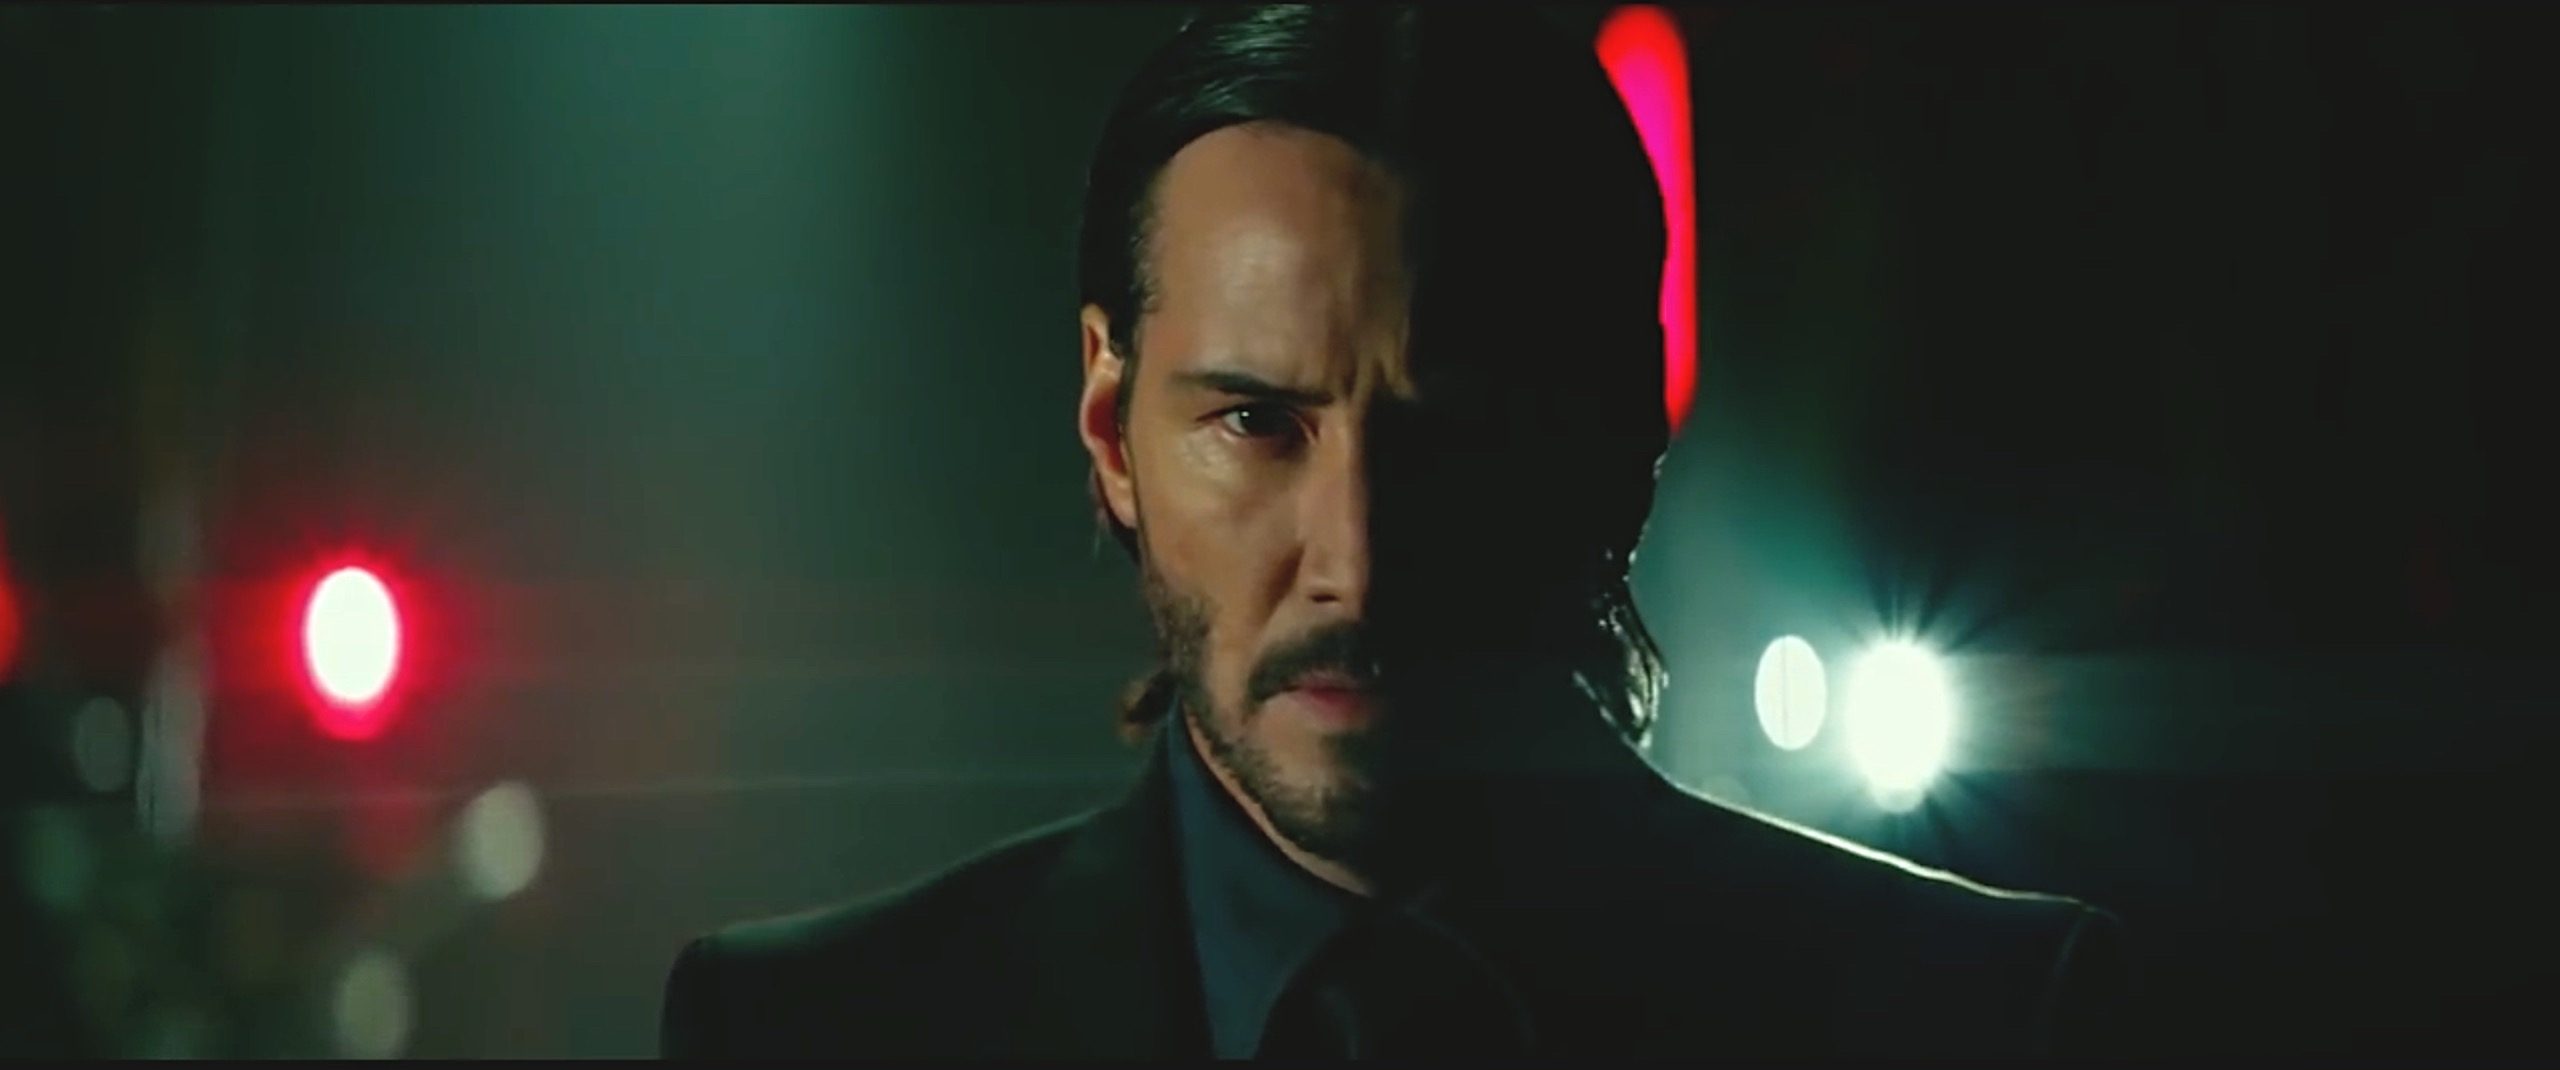 Peacock Announces John Wick Prequel Series 'The Continental' Coming In 2023